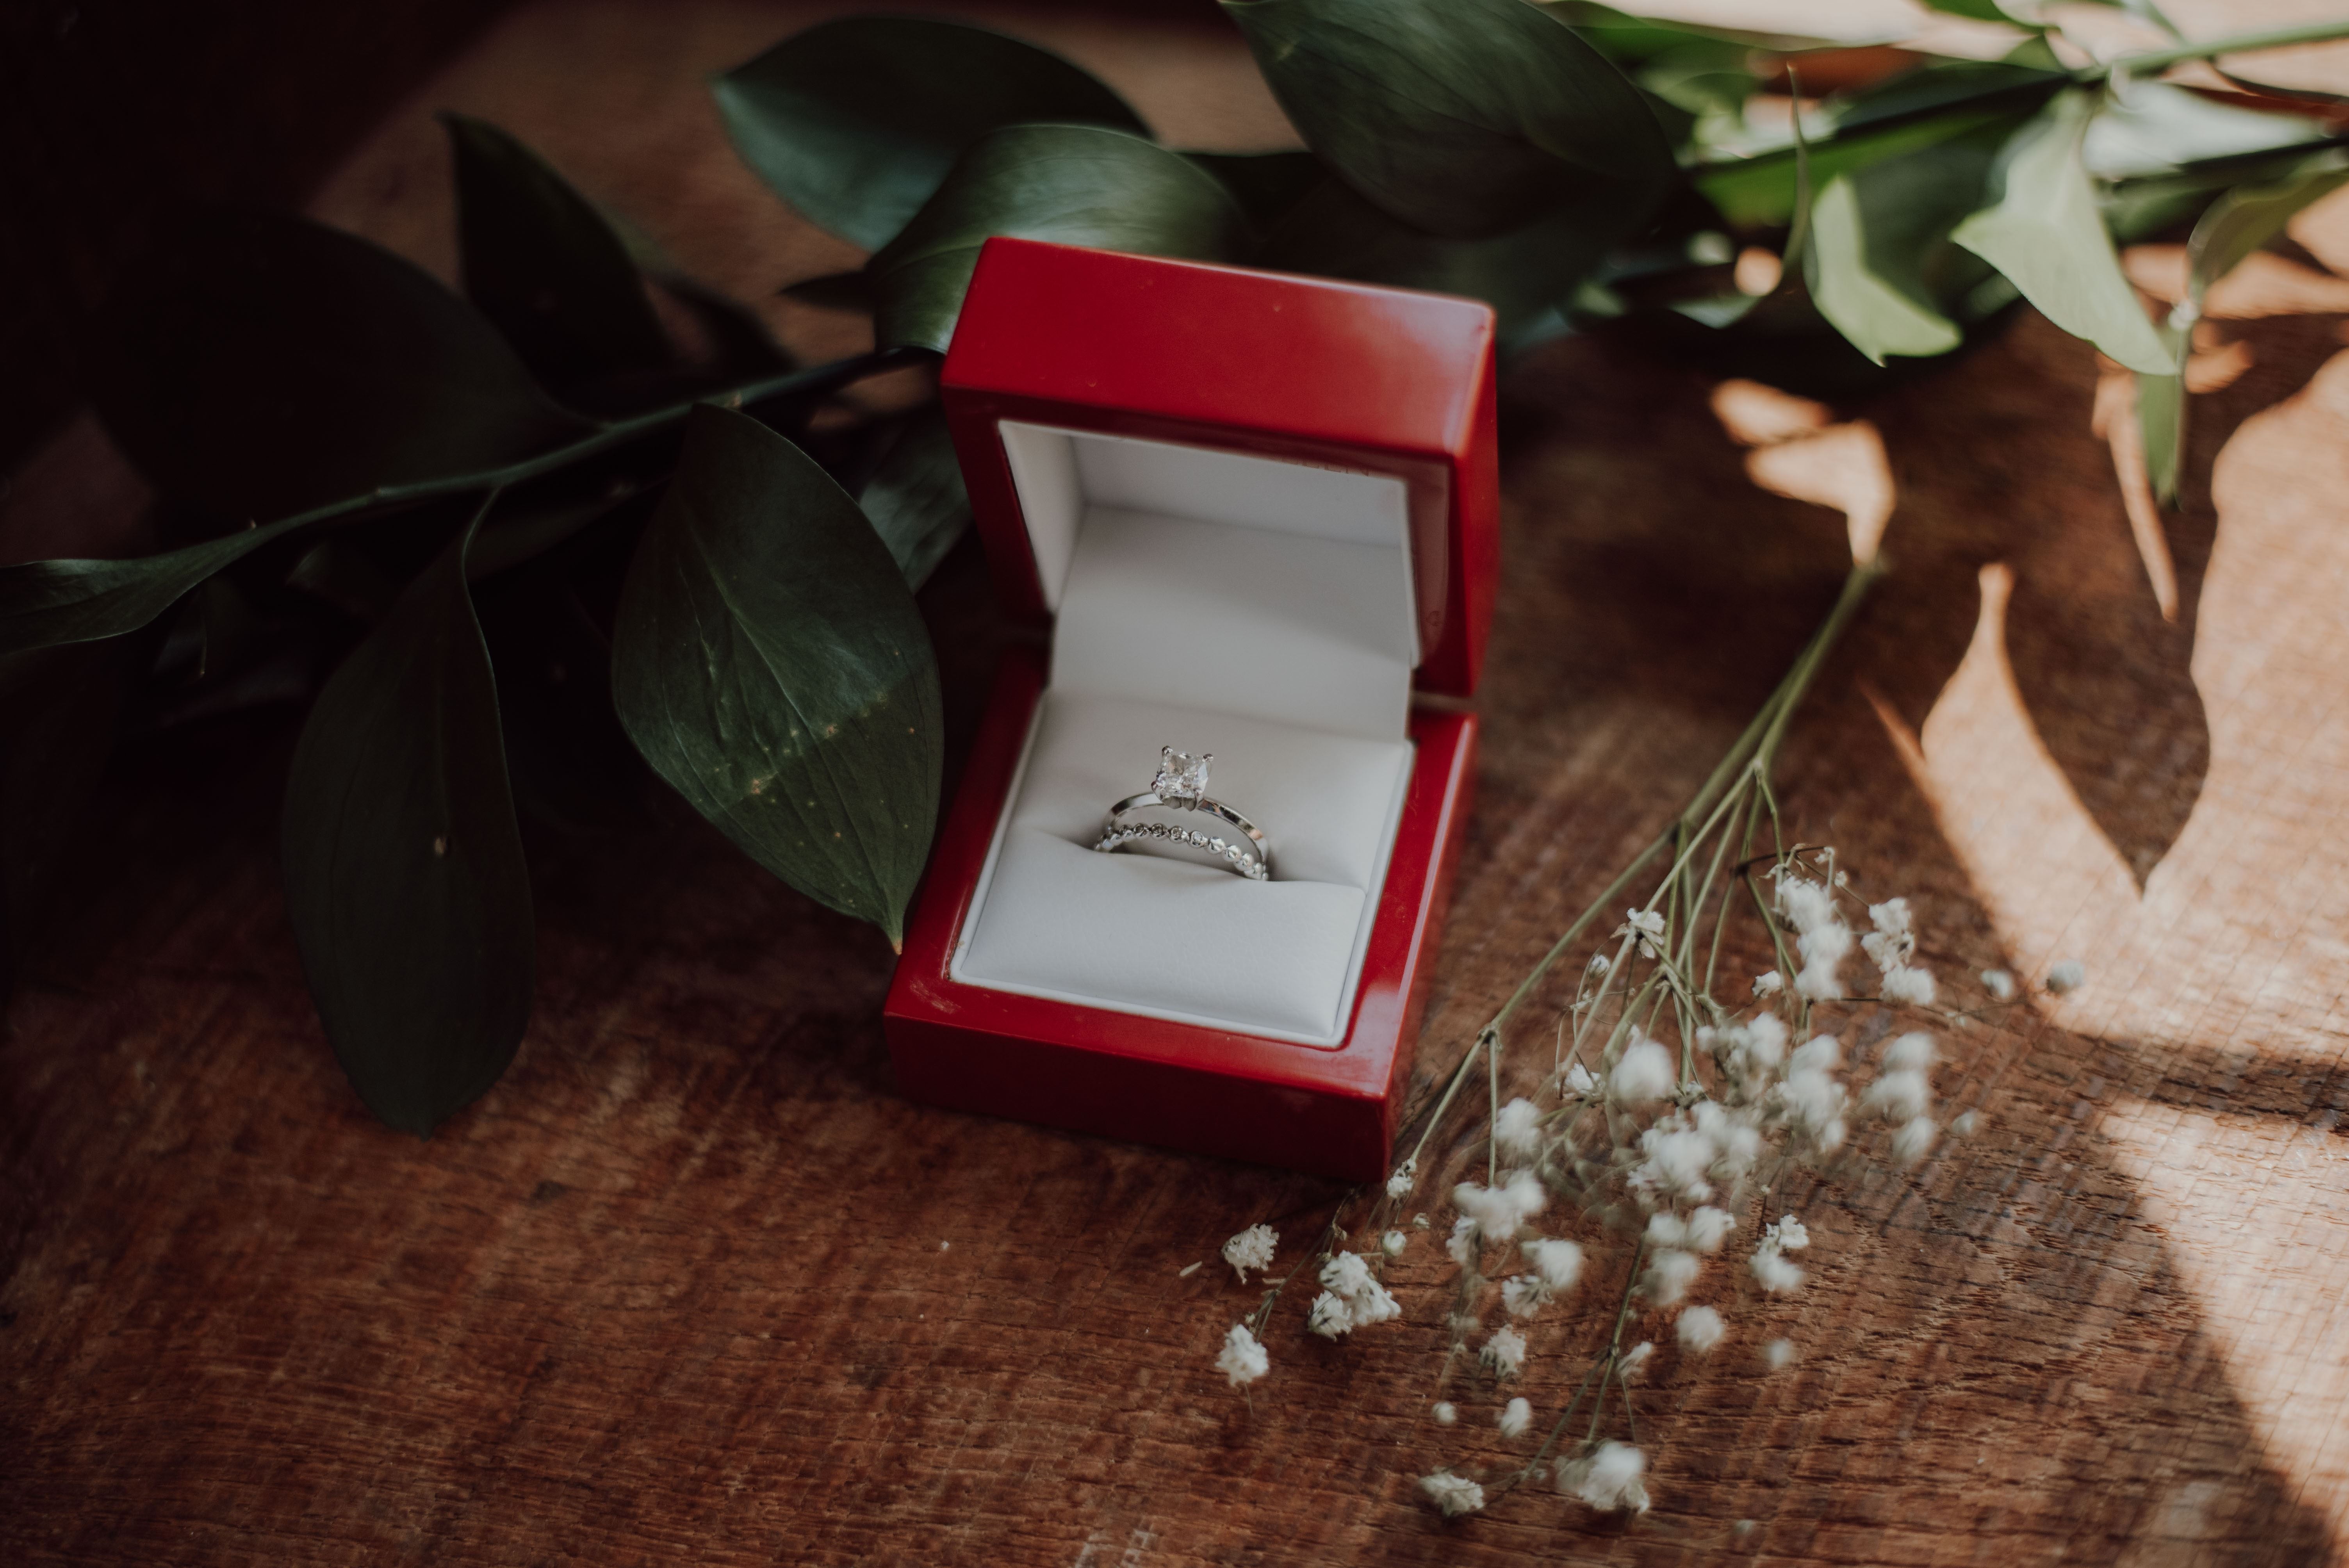 Cibik Law, P.C. - #tbt to answering the question on our #blog: Can I Lose  my Engagement Ring in Bankruptcy? https://bit.ly/2zC3sZo #bankruptcy # engagement #engagementring #shesaidyes #bridetribe #brideandgroom #attorney  #attorneyatlaw #lawyer | Facebook